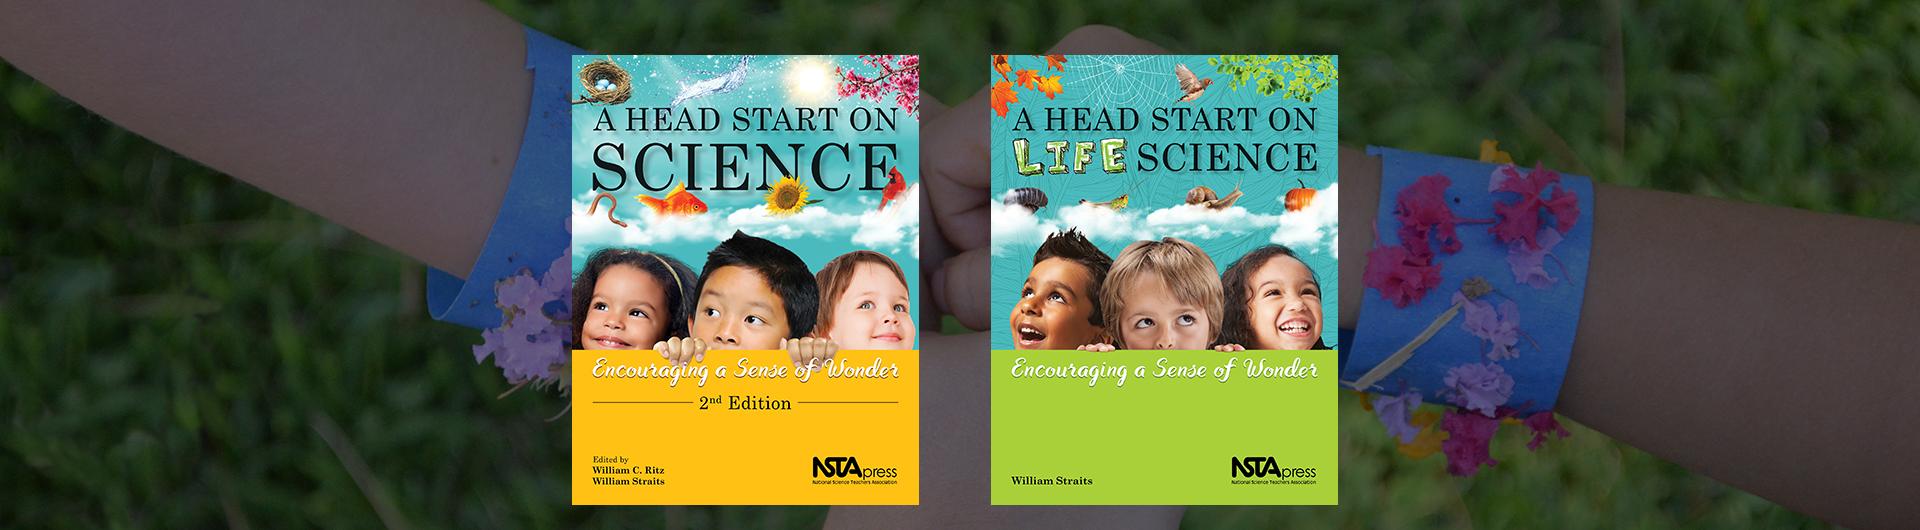 A Head Start on Science and A Head Start on Life Science books